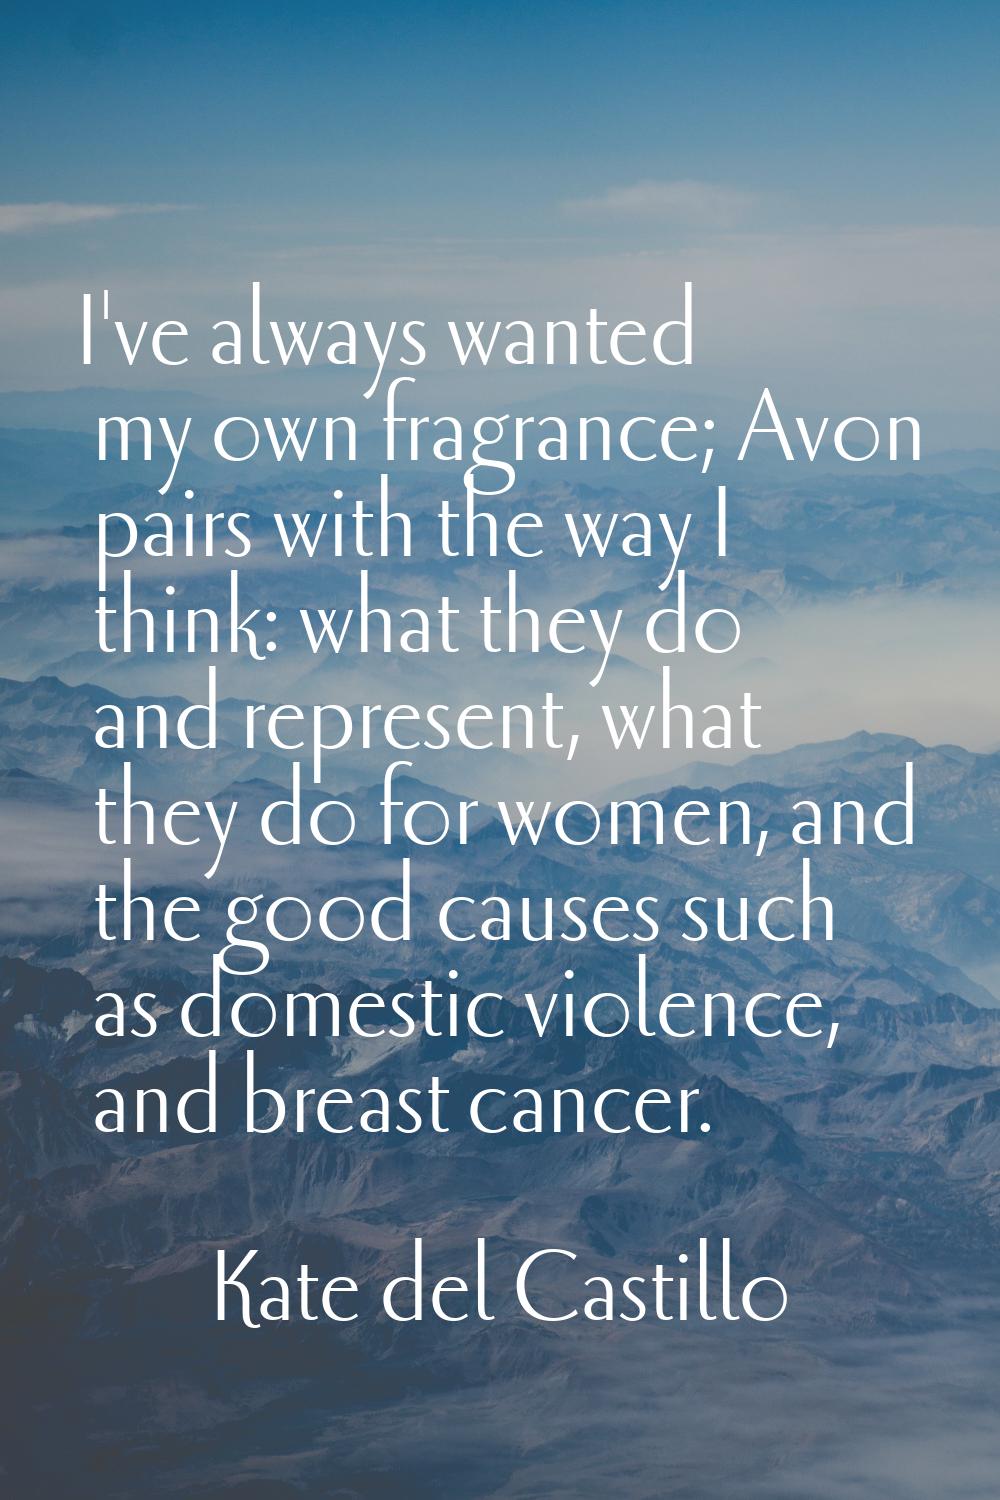 I've always wanted my own fragrance; Avon pairs with the way I think: what they do and represent, w